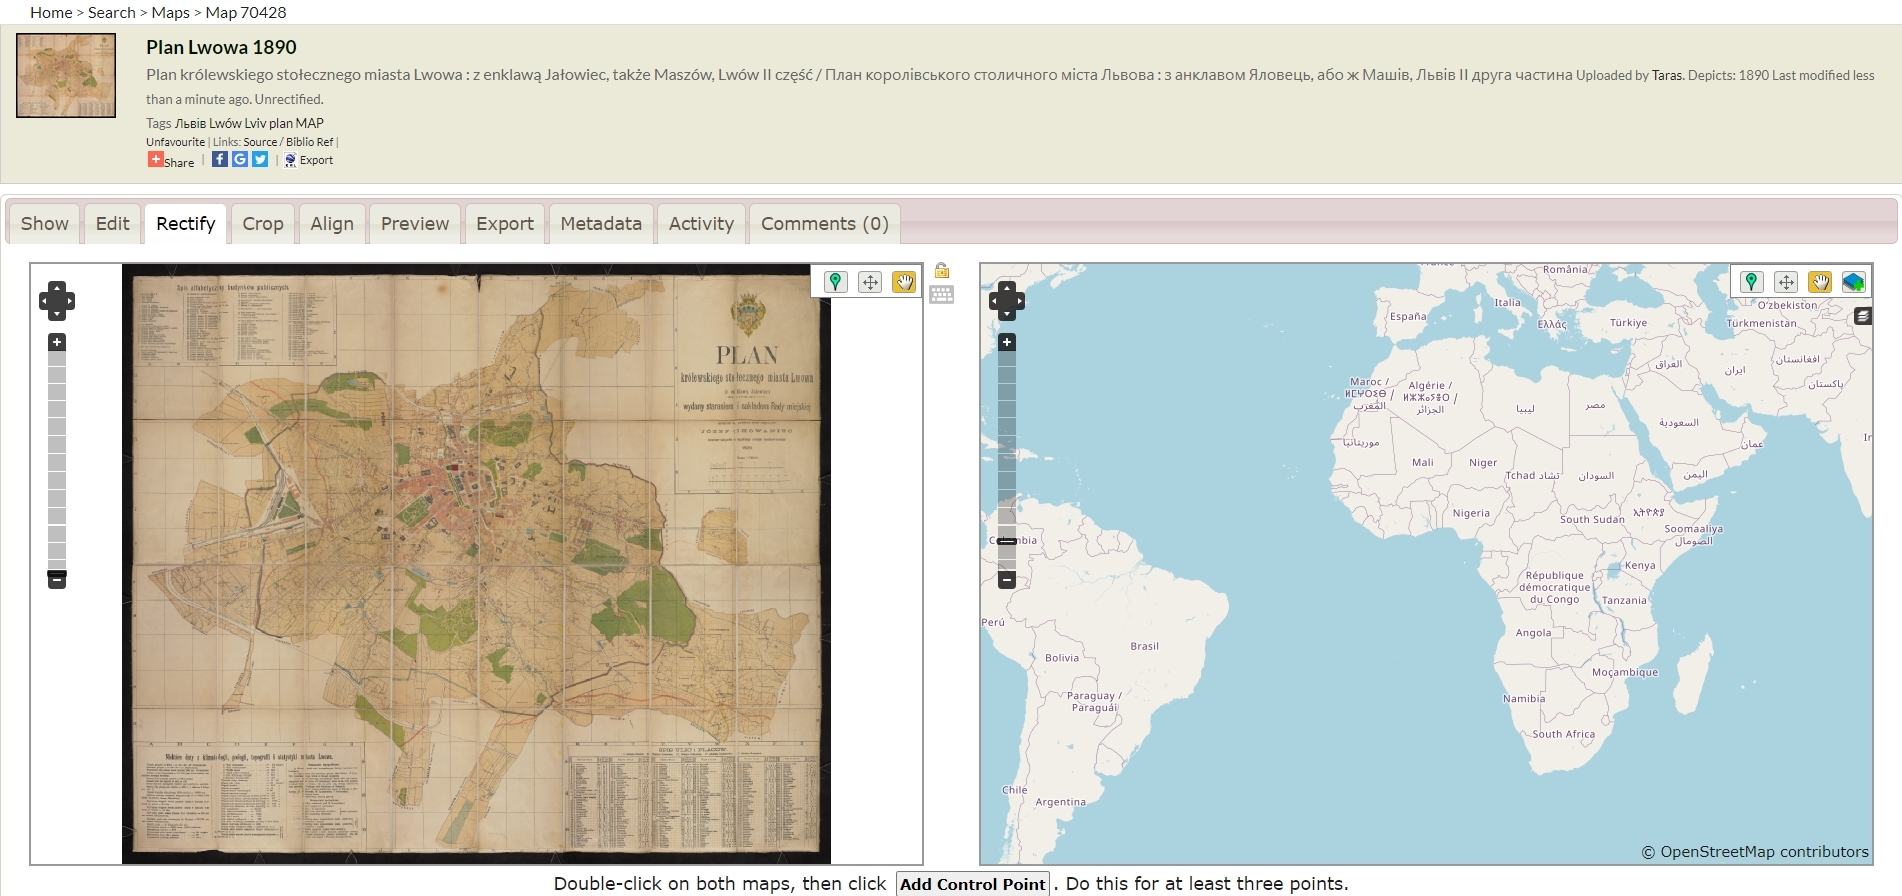 Screenshot of the Rectify tab of Map Warper's interface, displaying a historical map on the left alongside a contemporary map on the right. The two maps delineate the same geographical region, at roughly the same scale. The two maps are marked with a set of closely-matching marker points.